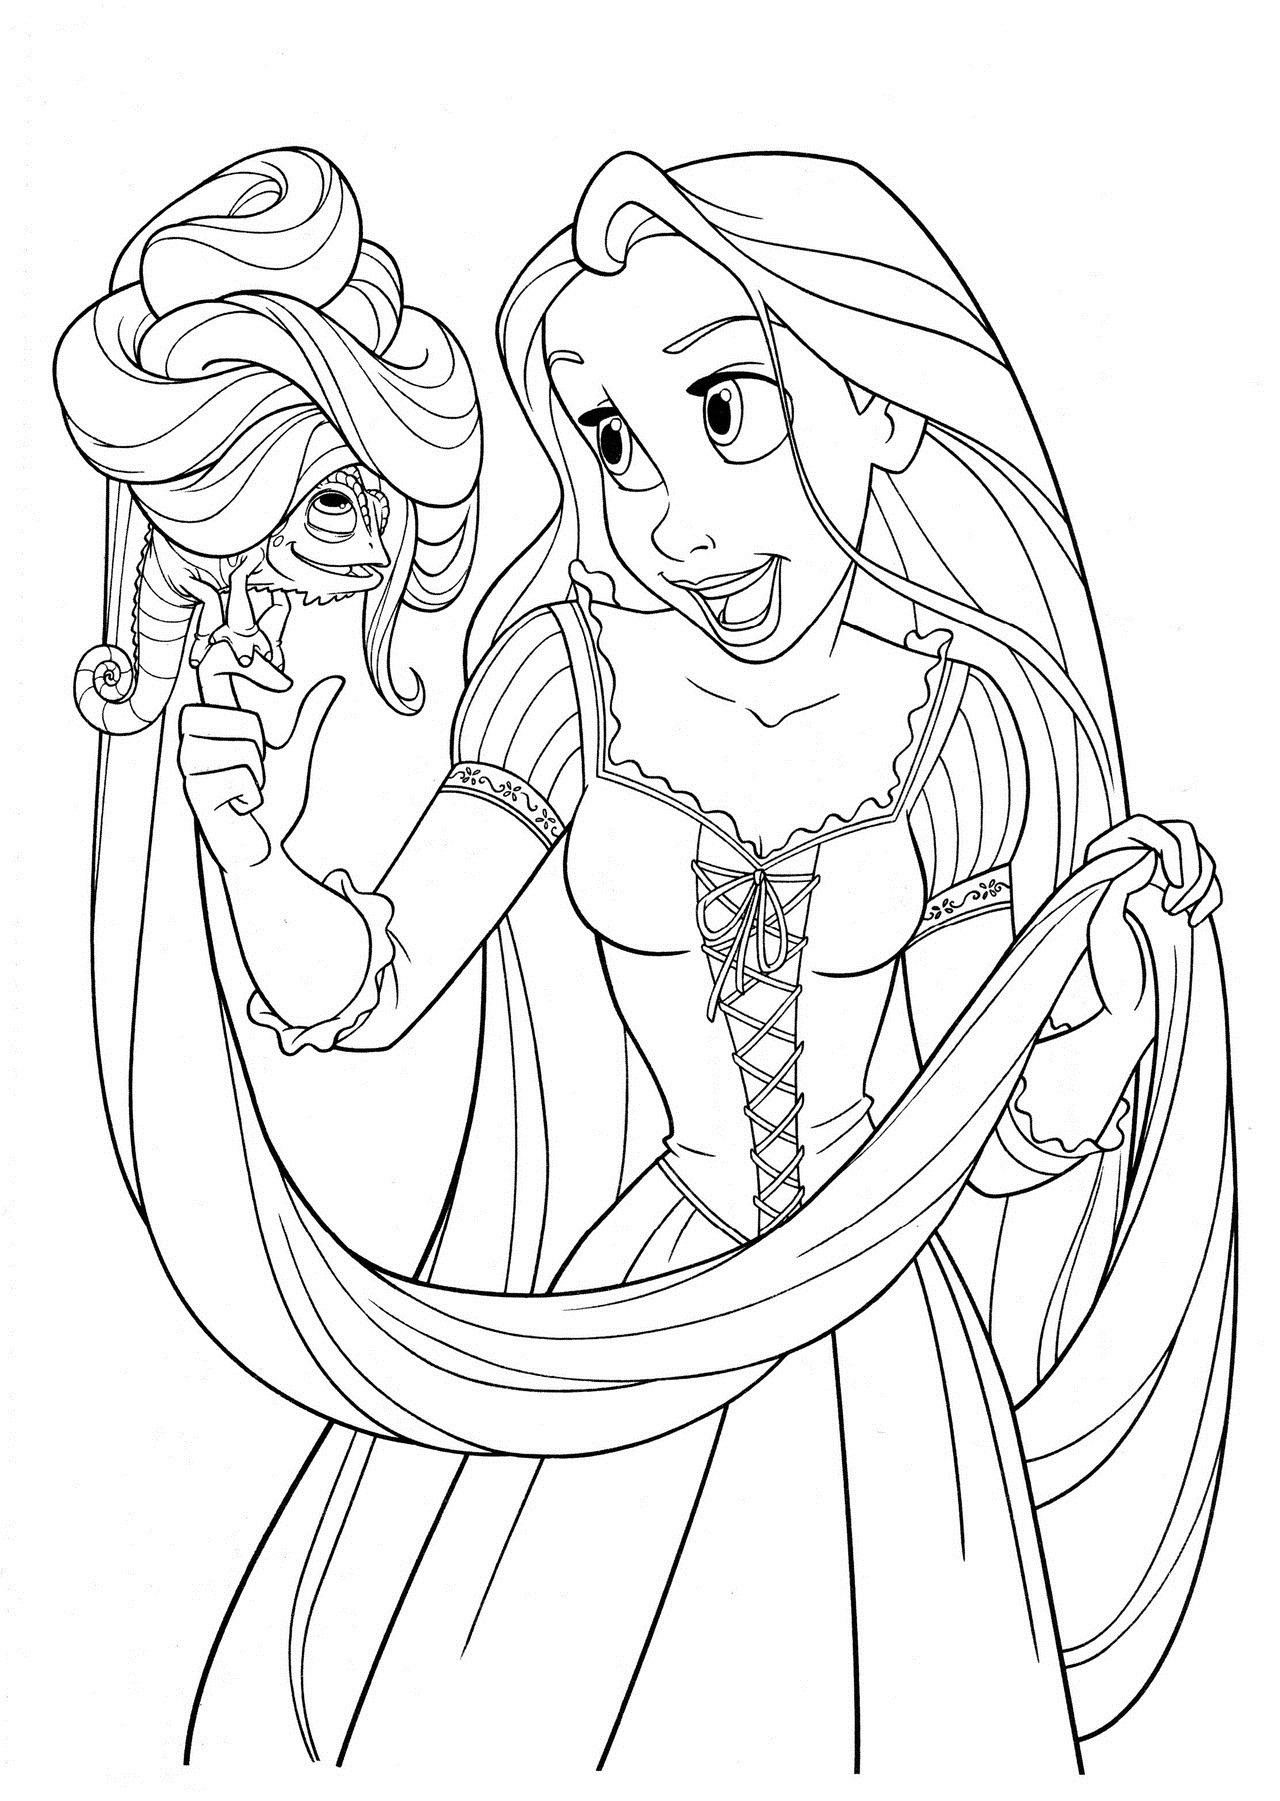 Rapunzel Printable Coloring Pages
 Free Printable Tangled Coloring Pages For Kids